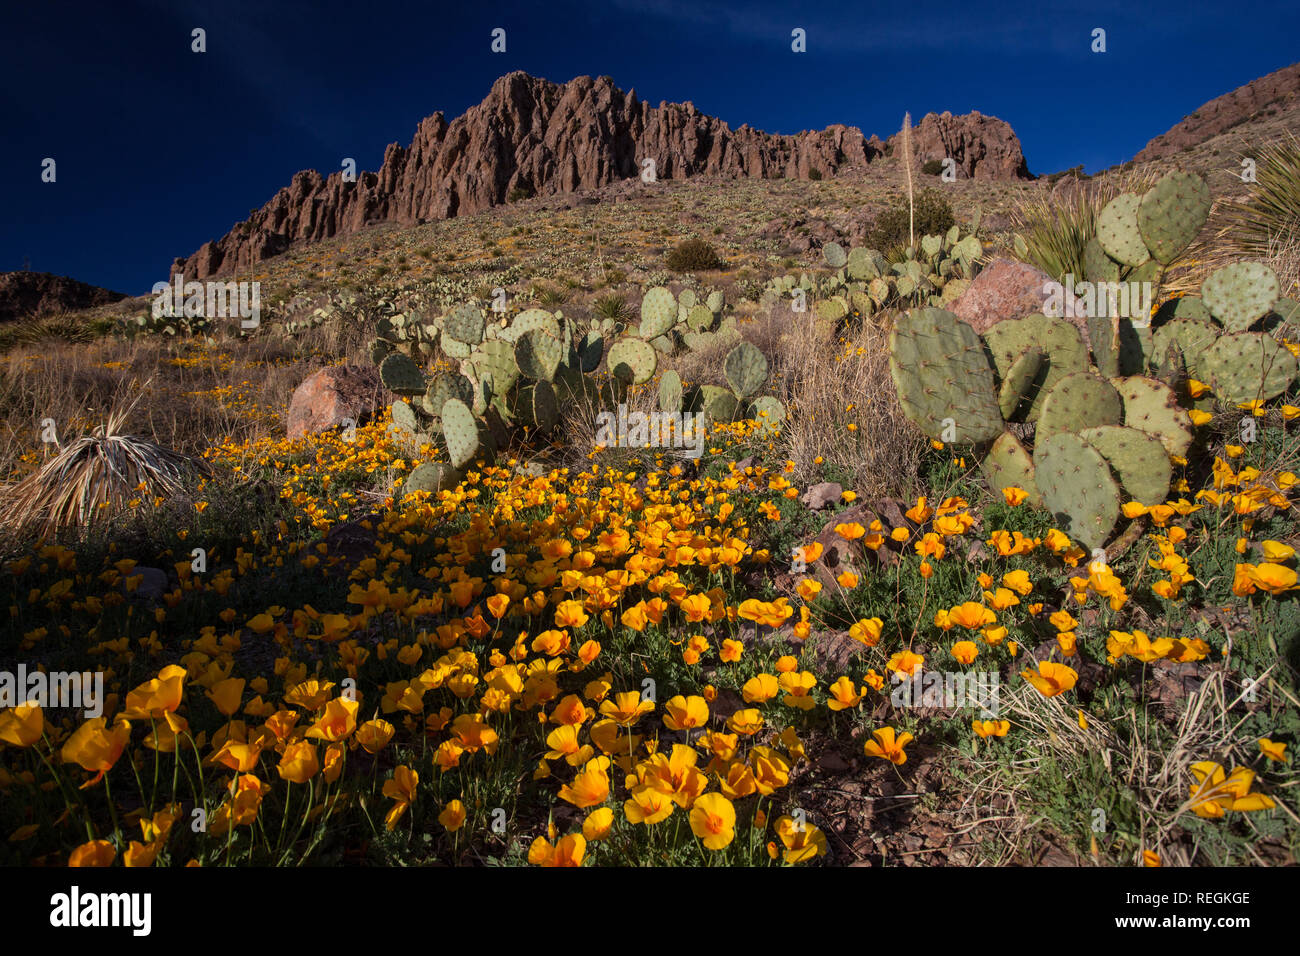 Wildflowers surround craggy mountains and cactus near Deming, New Mexico Stock Photo